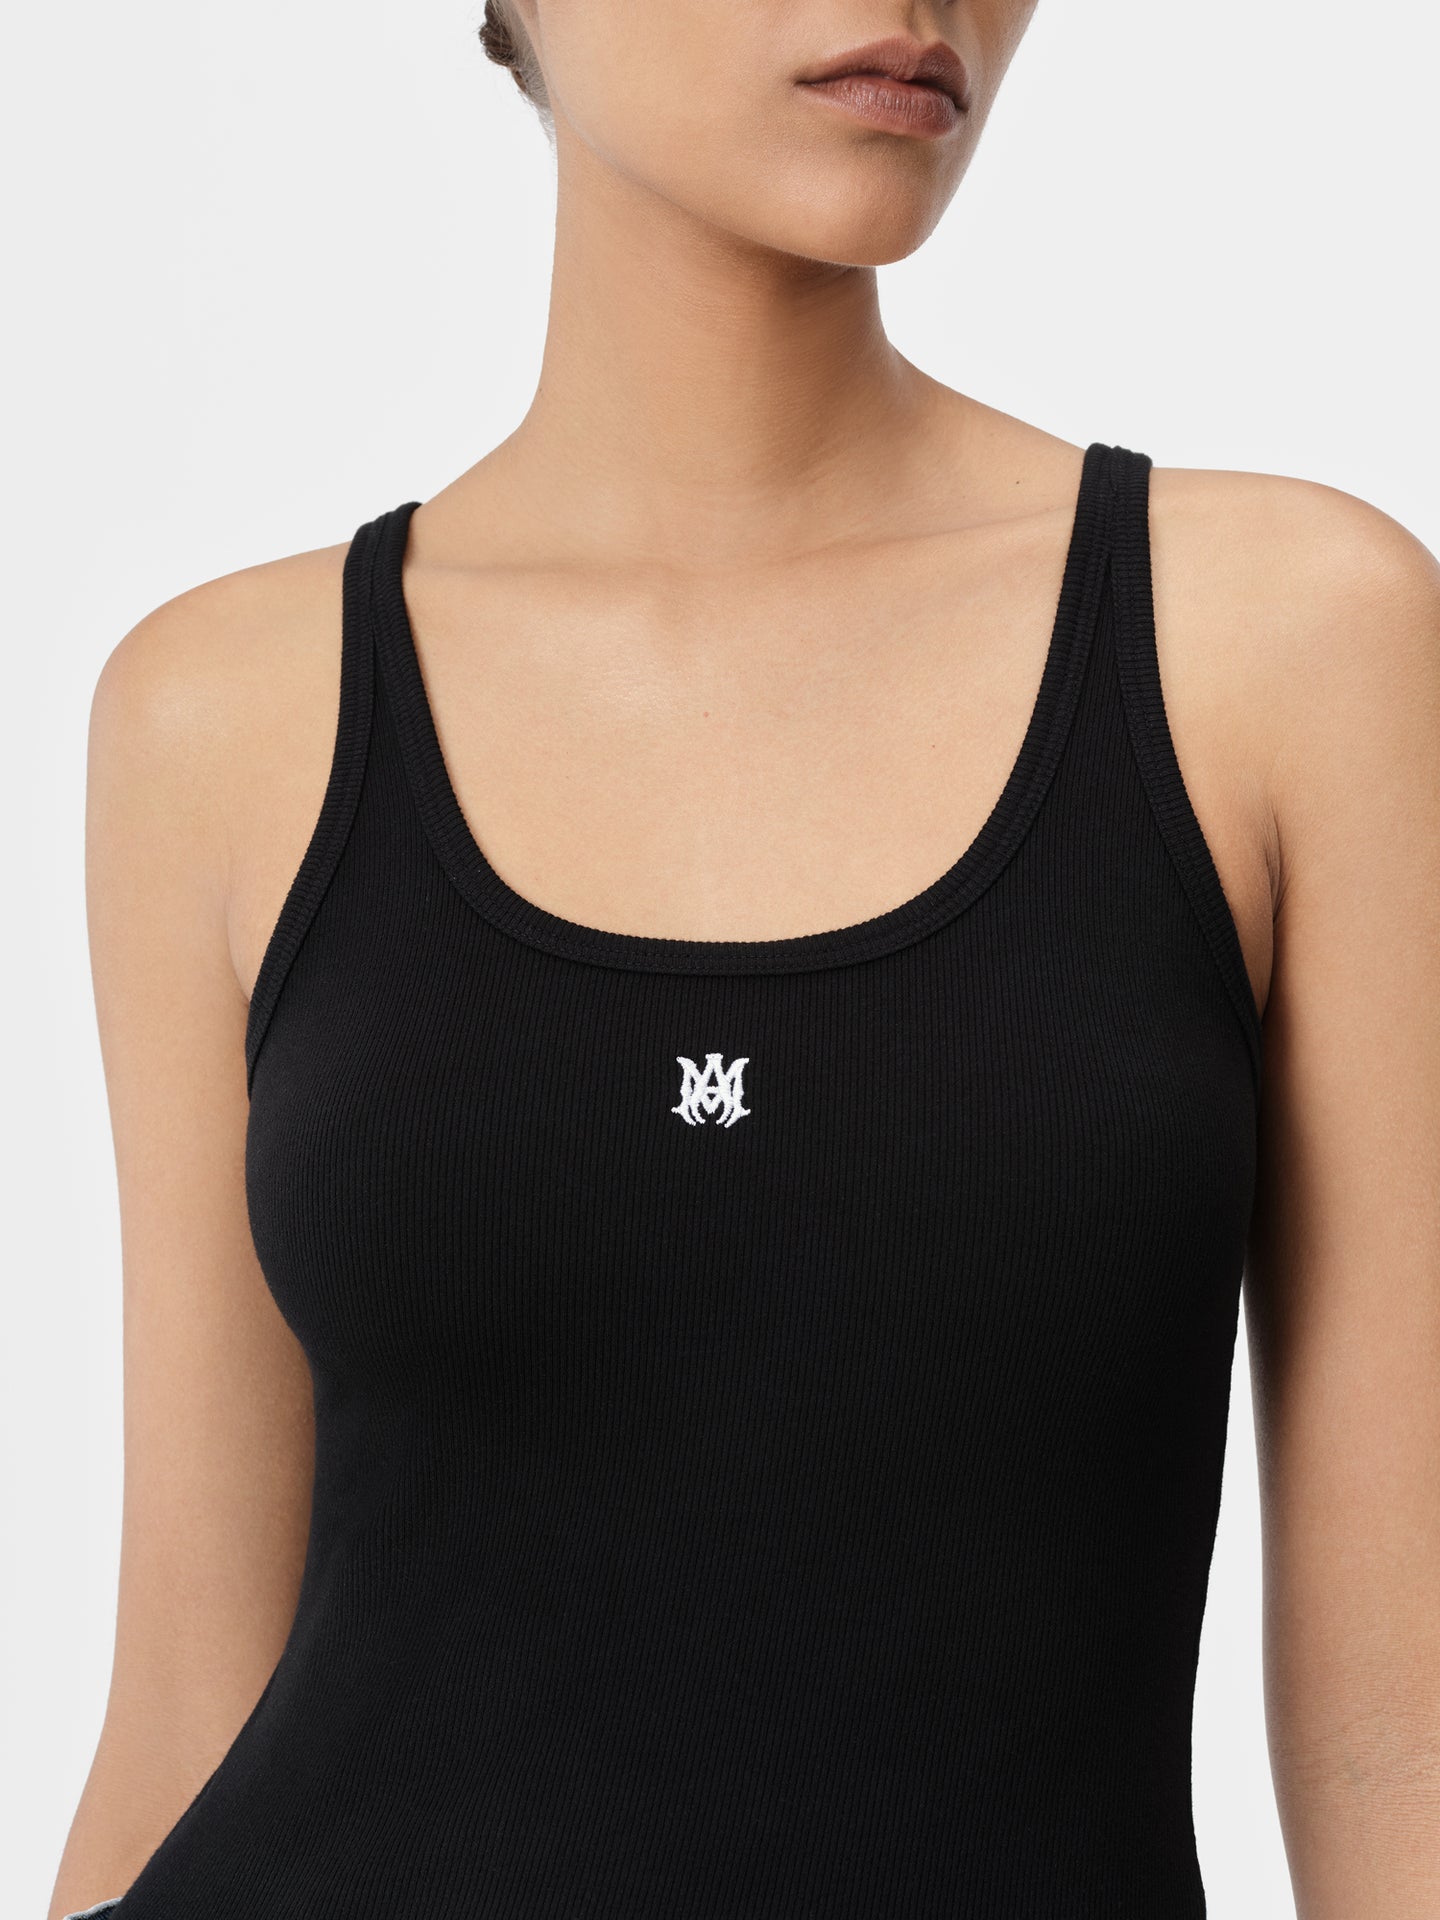 WOMEN - WOMEN'S MA EMBROIDERED RIBBED TANK - Black